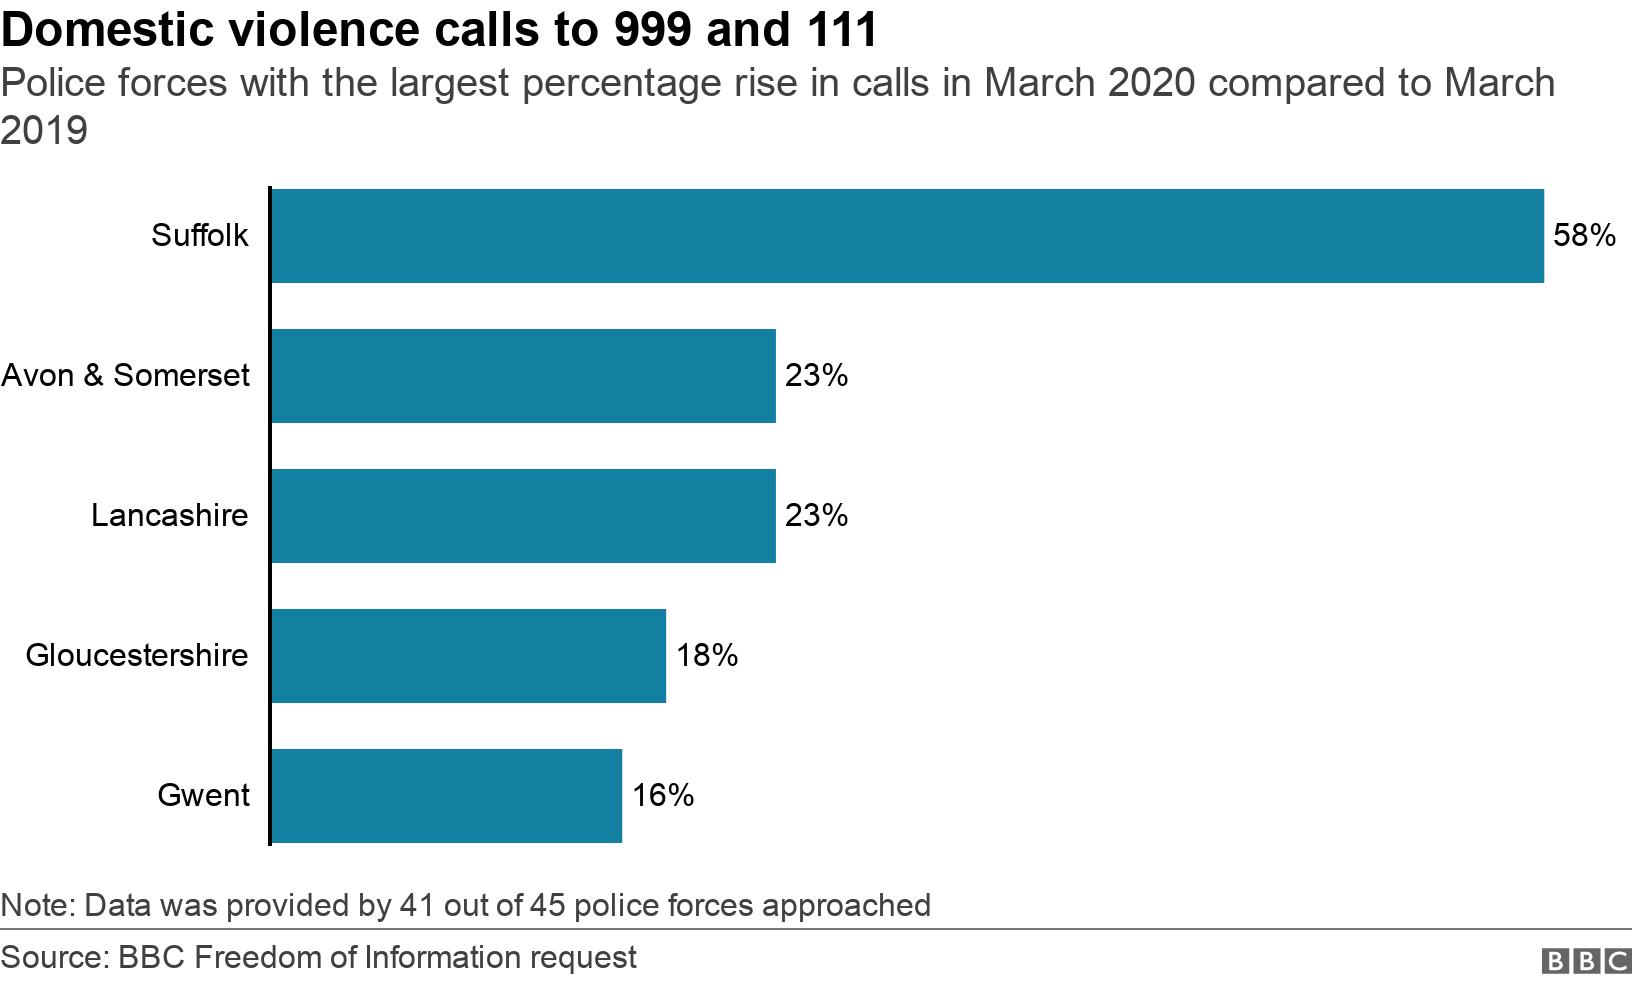 Domestic violence calls to 999 and 111. Police forces with the largest percentage rise in calls in March 2020 compared to March 2019.  Note: Data was provided by 41 out of 45 police forces approached.